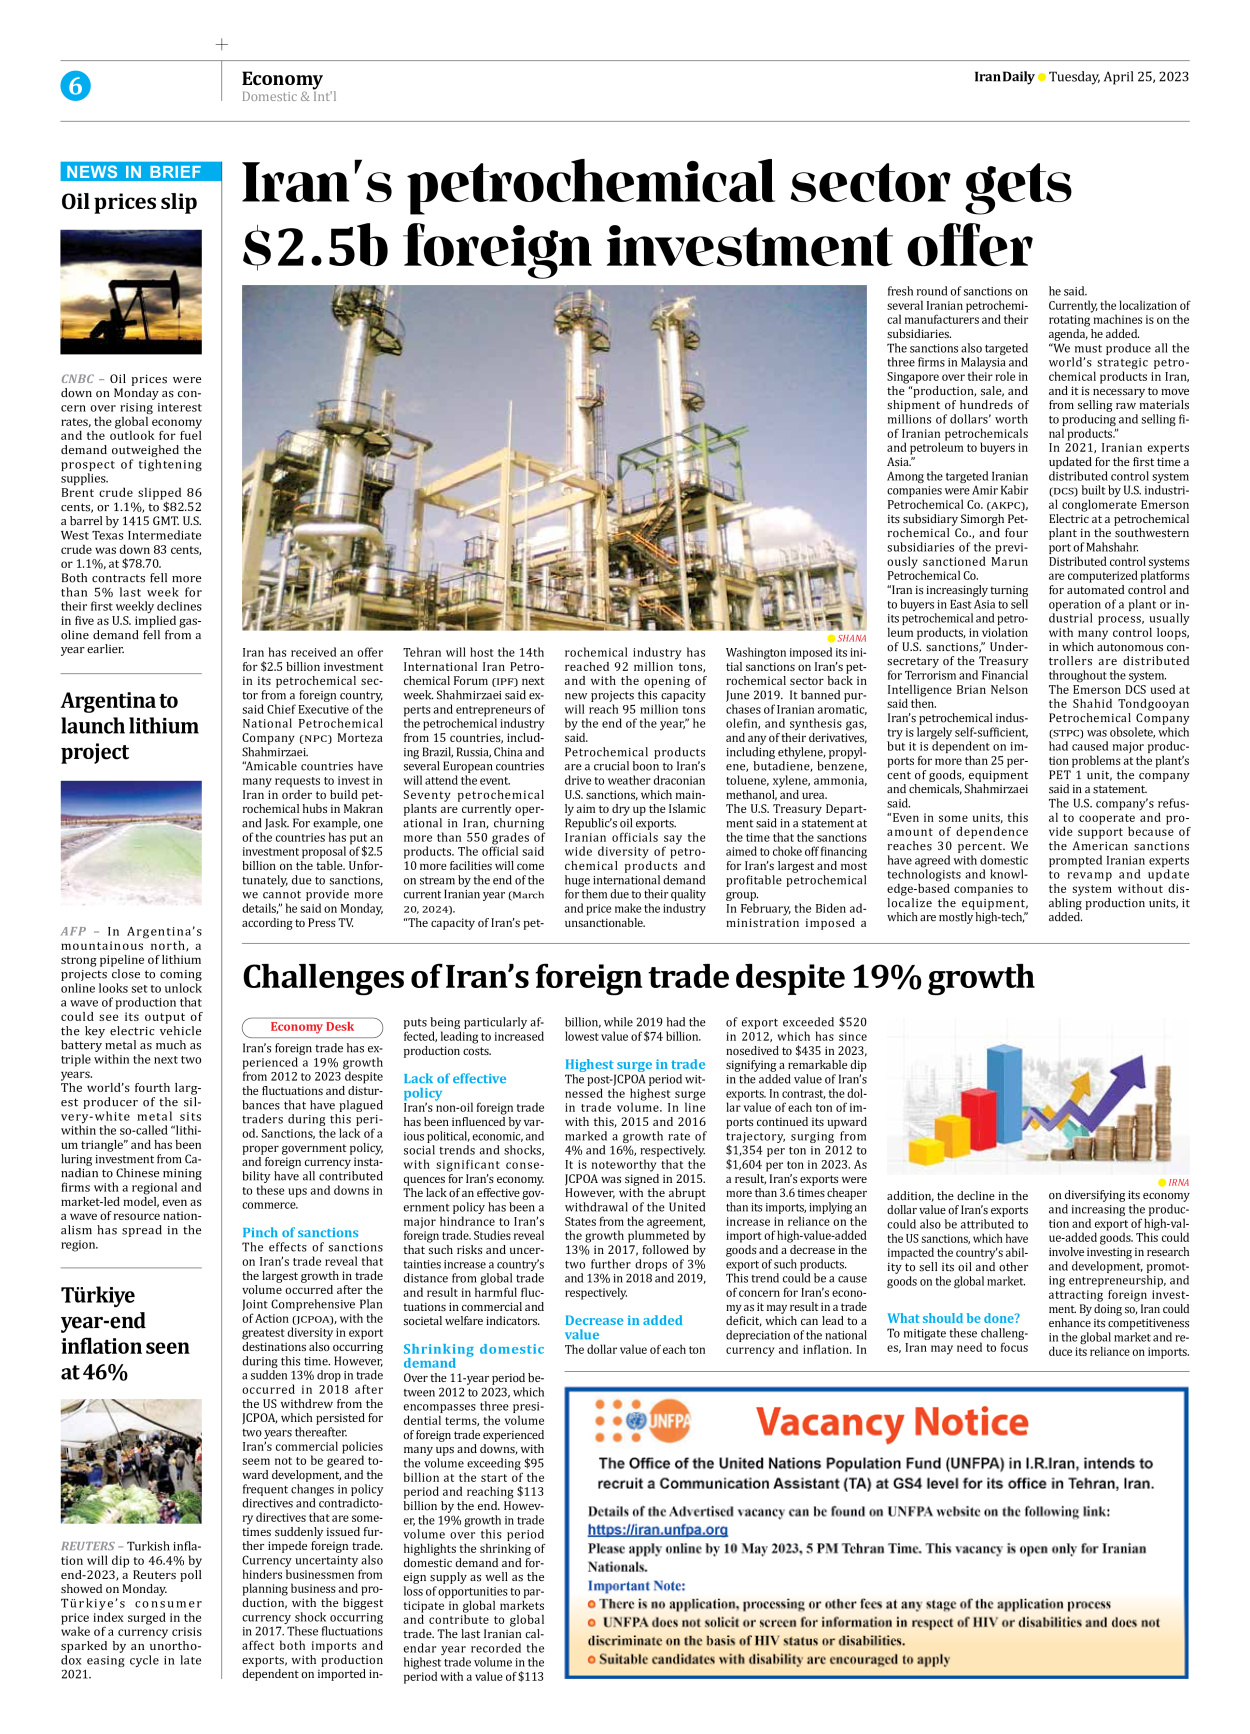 Iran Daily - Number Seven Thousand Two Hundred and Seventy Five - 25 April 2023 - Page 6